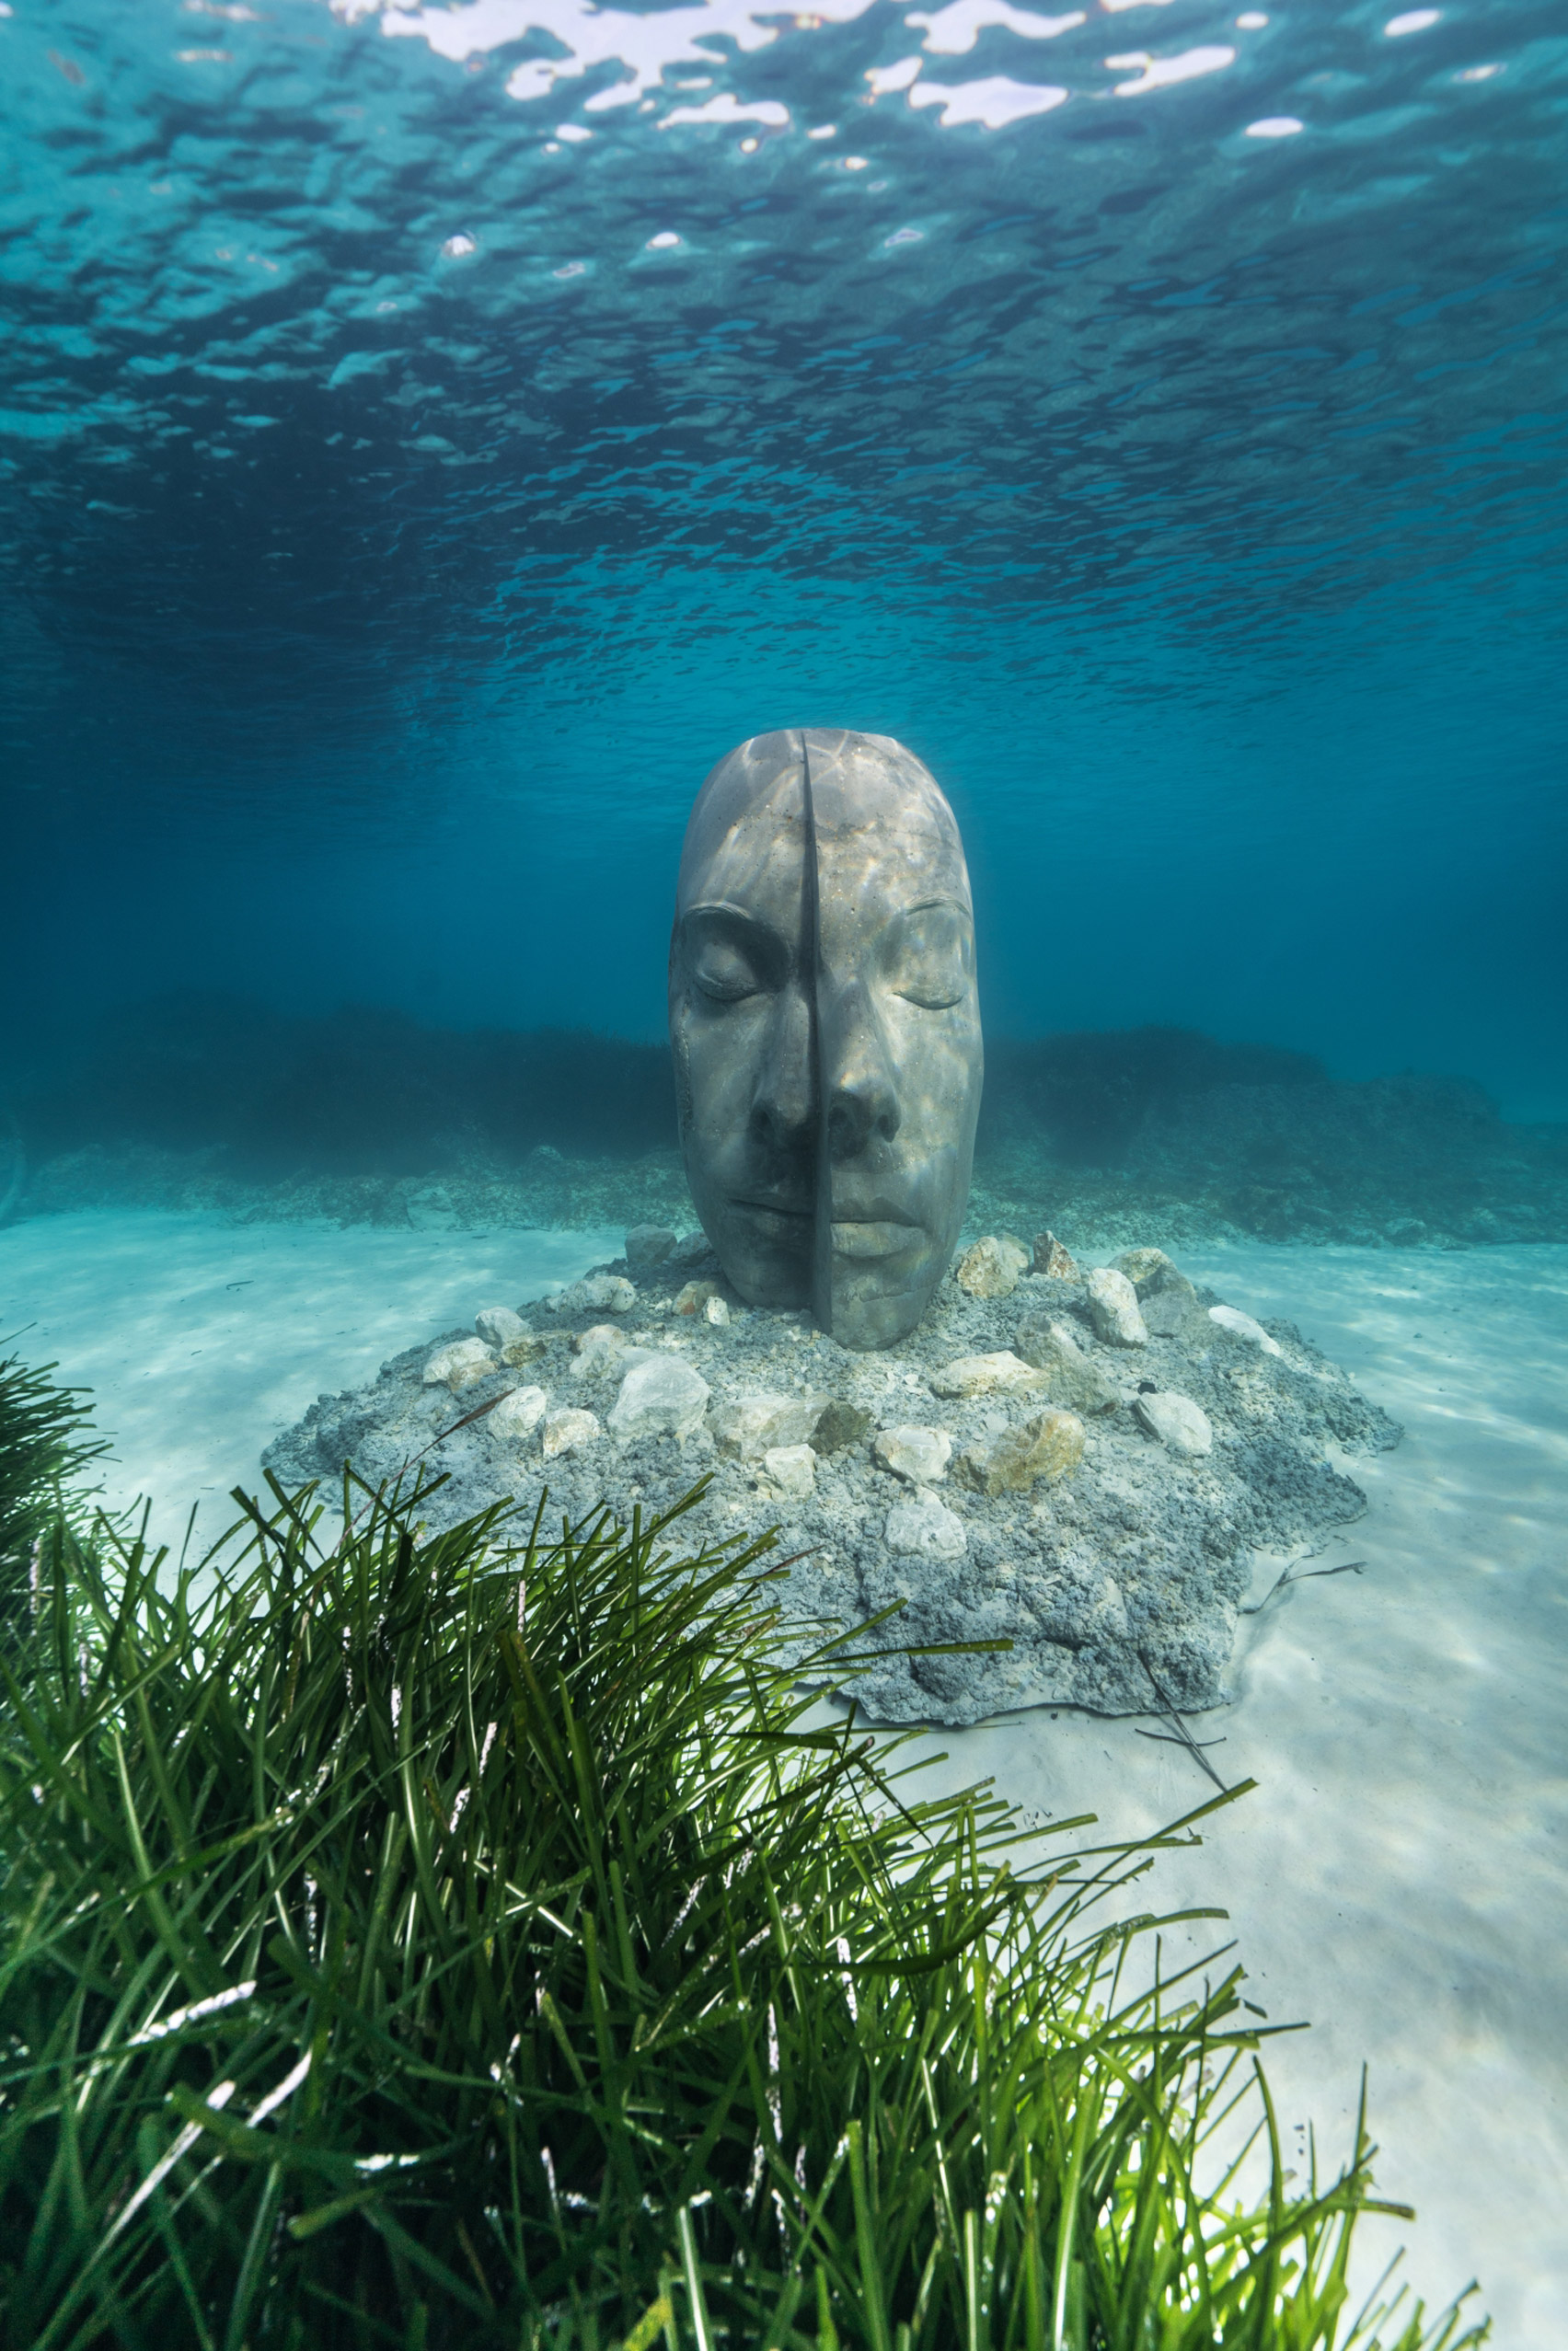 A sculpture of a human head submerged under water